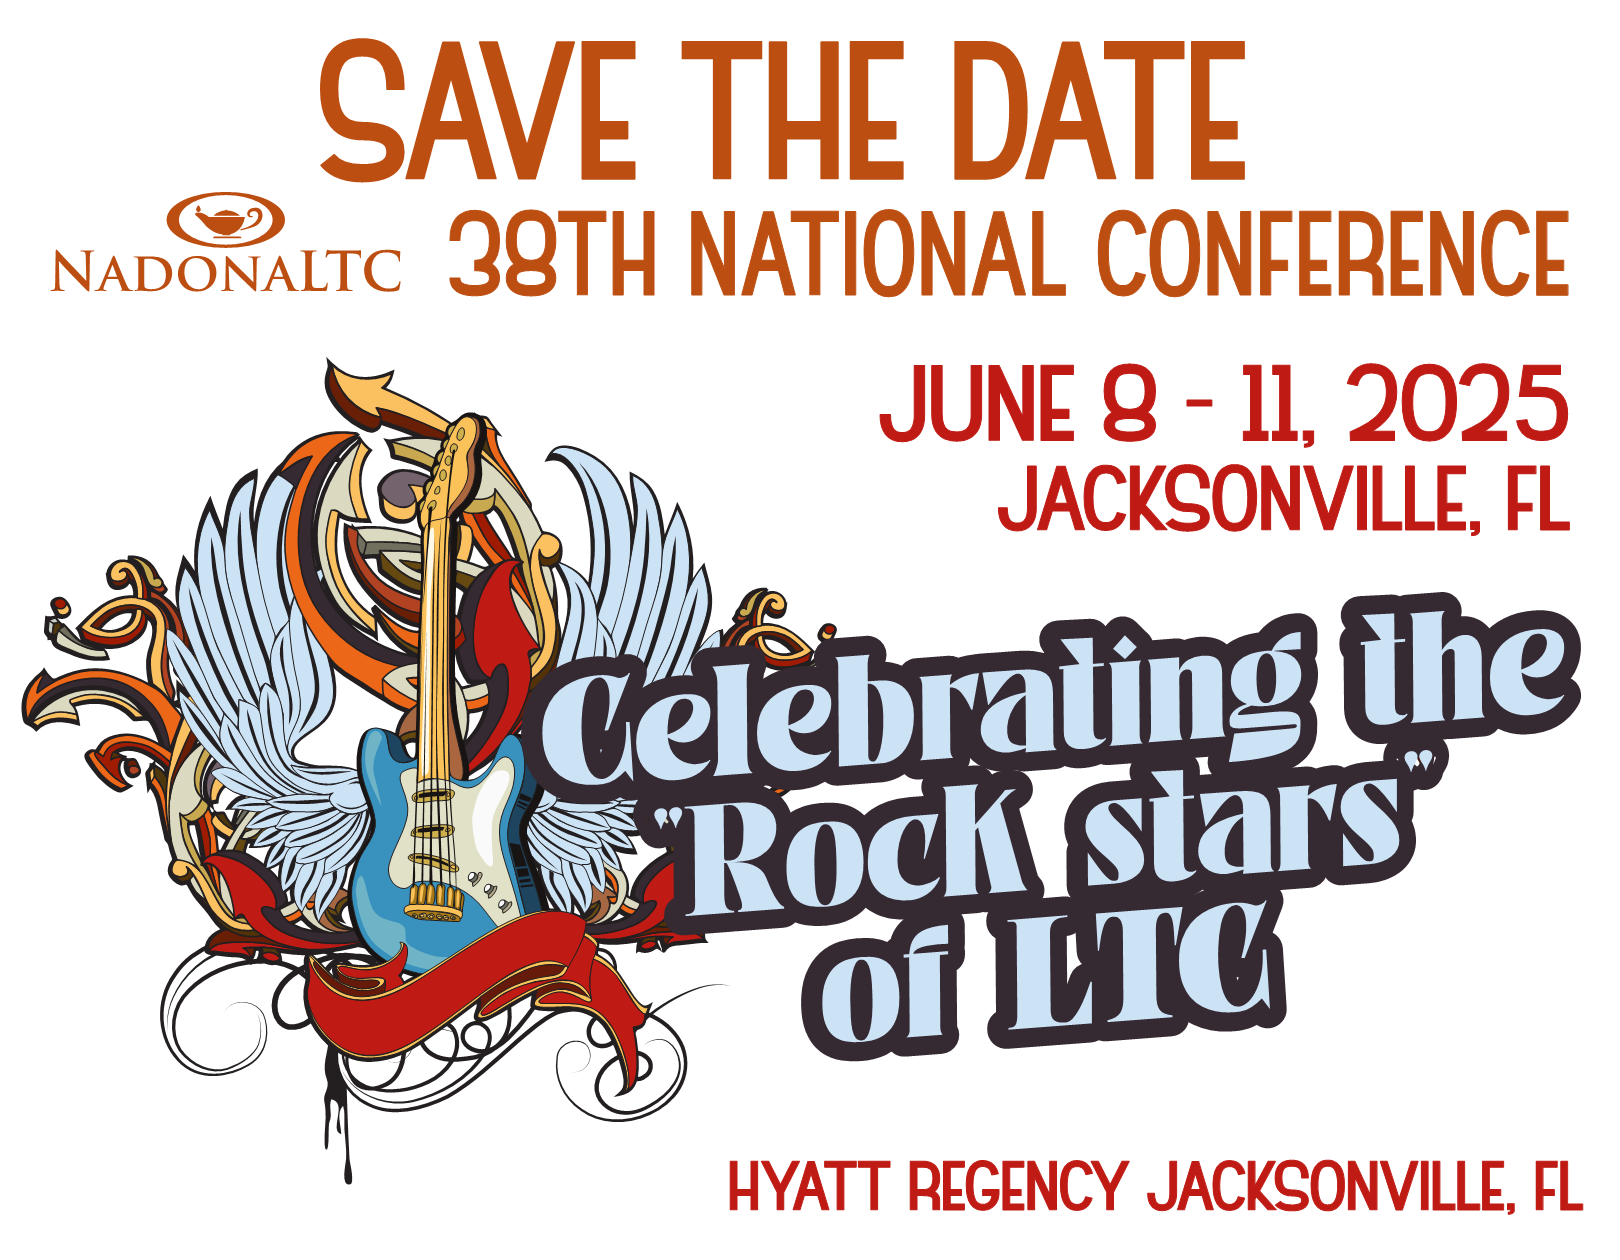 Save the Date! Jacksonville1